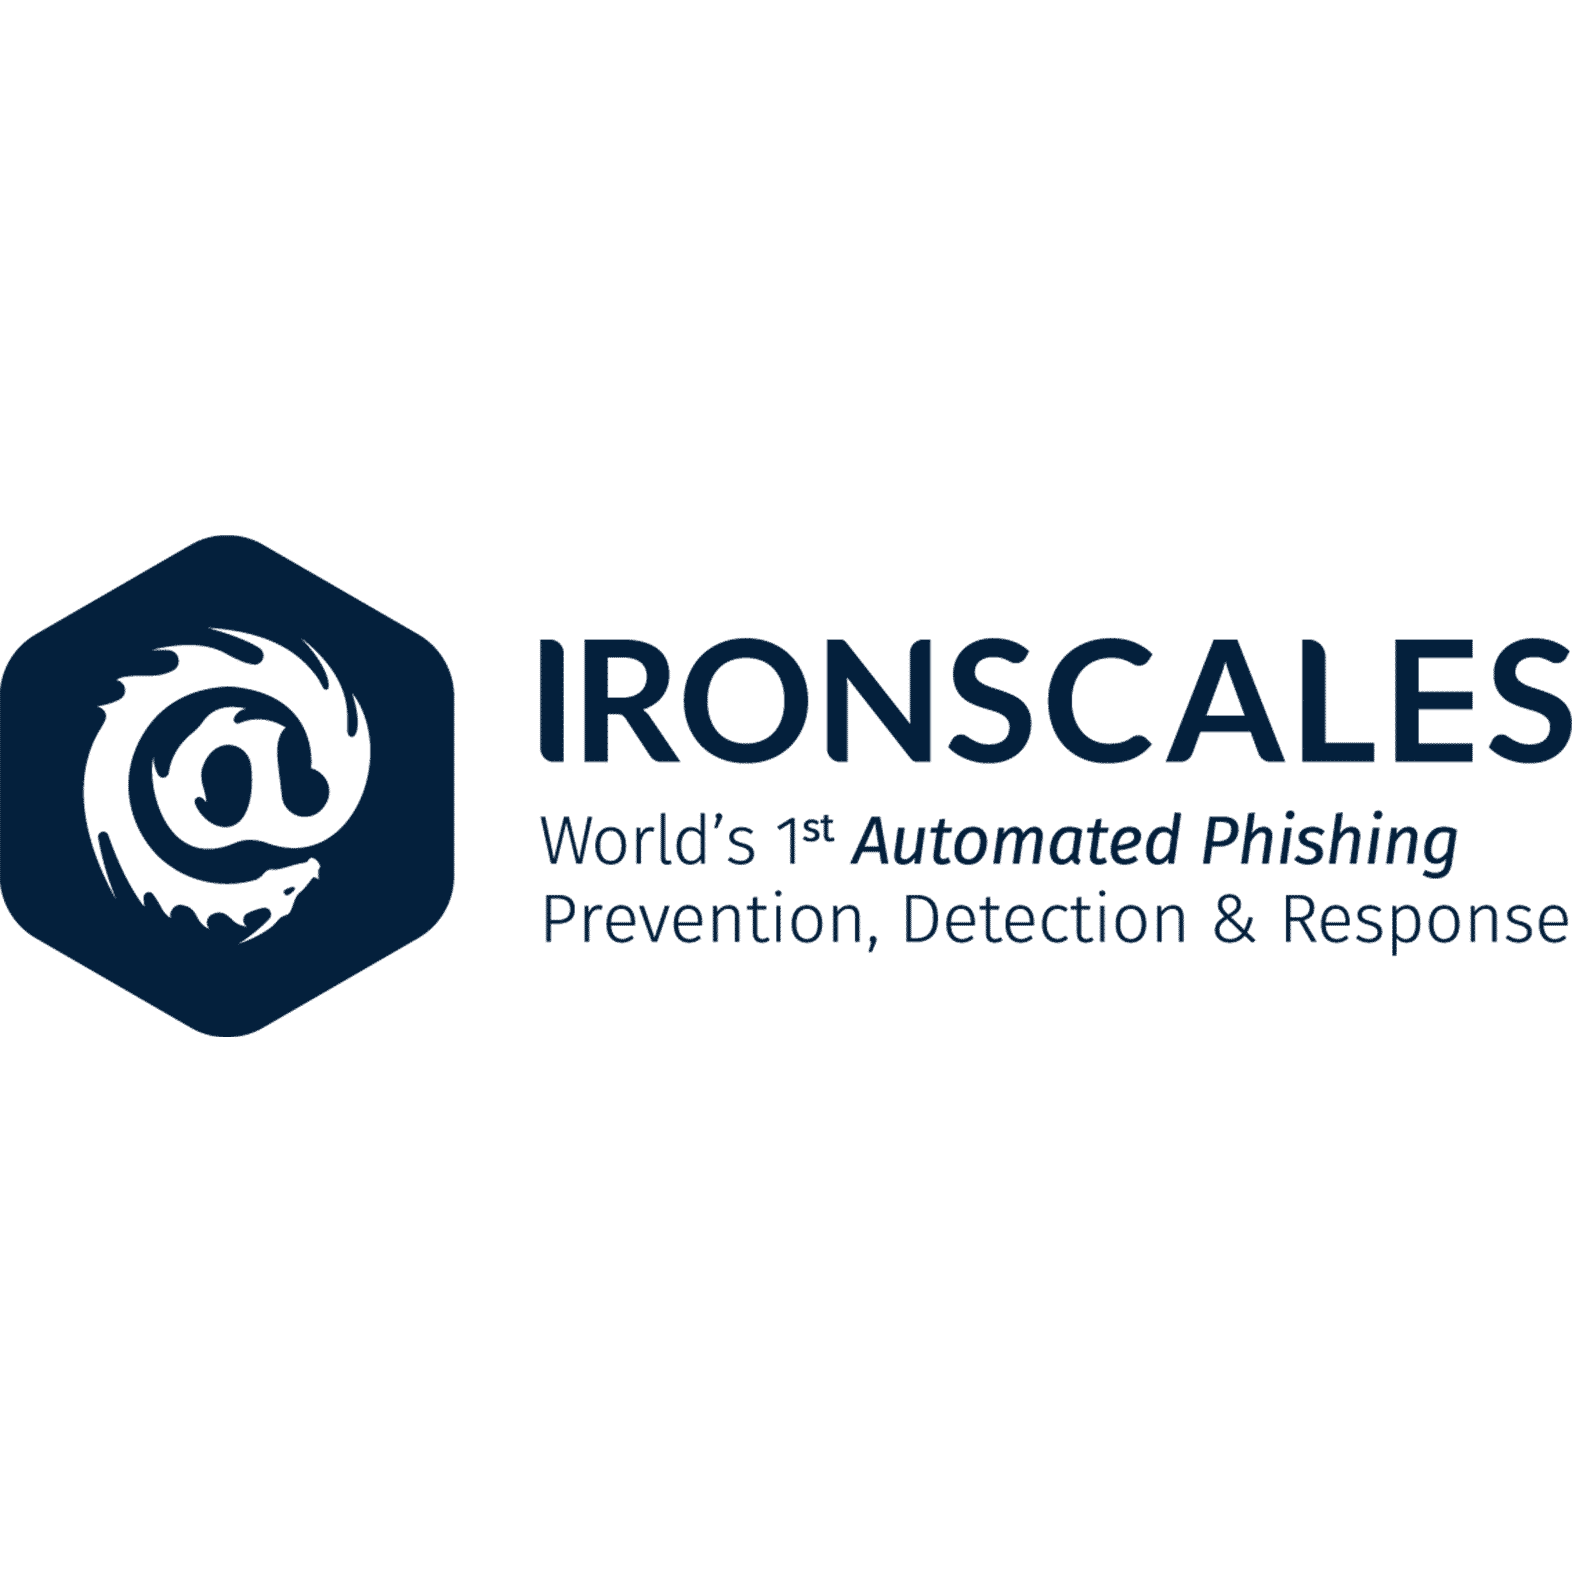 Ironscale logo a vendor of zirous managed services